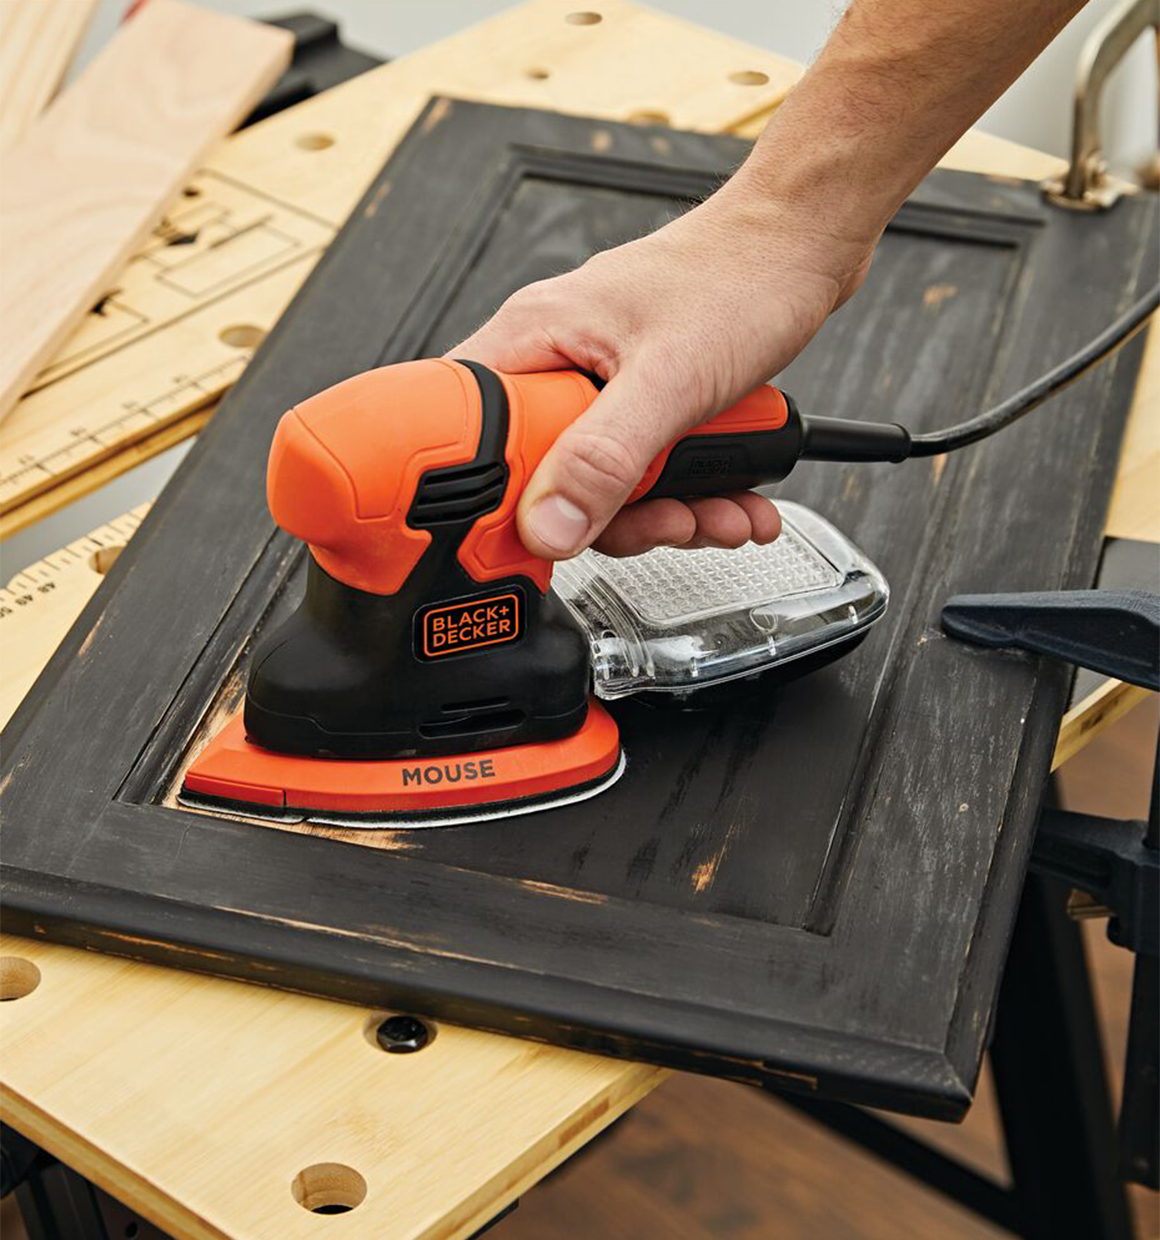 Black & Decker® MS2000 - 120 V 2.0 A Corded Fixed Speed Detail 4-in-1 Multi- Sander with Smart Select™ Technology 